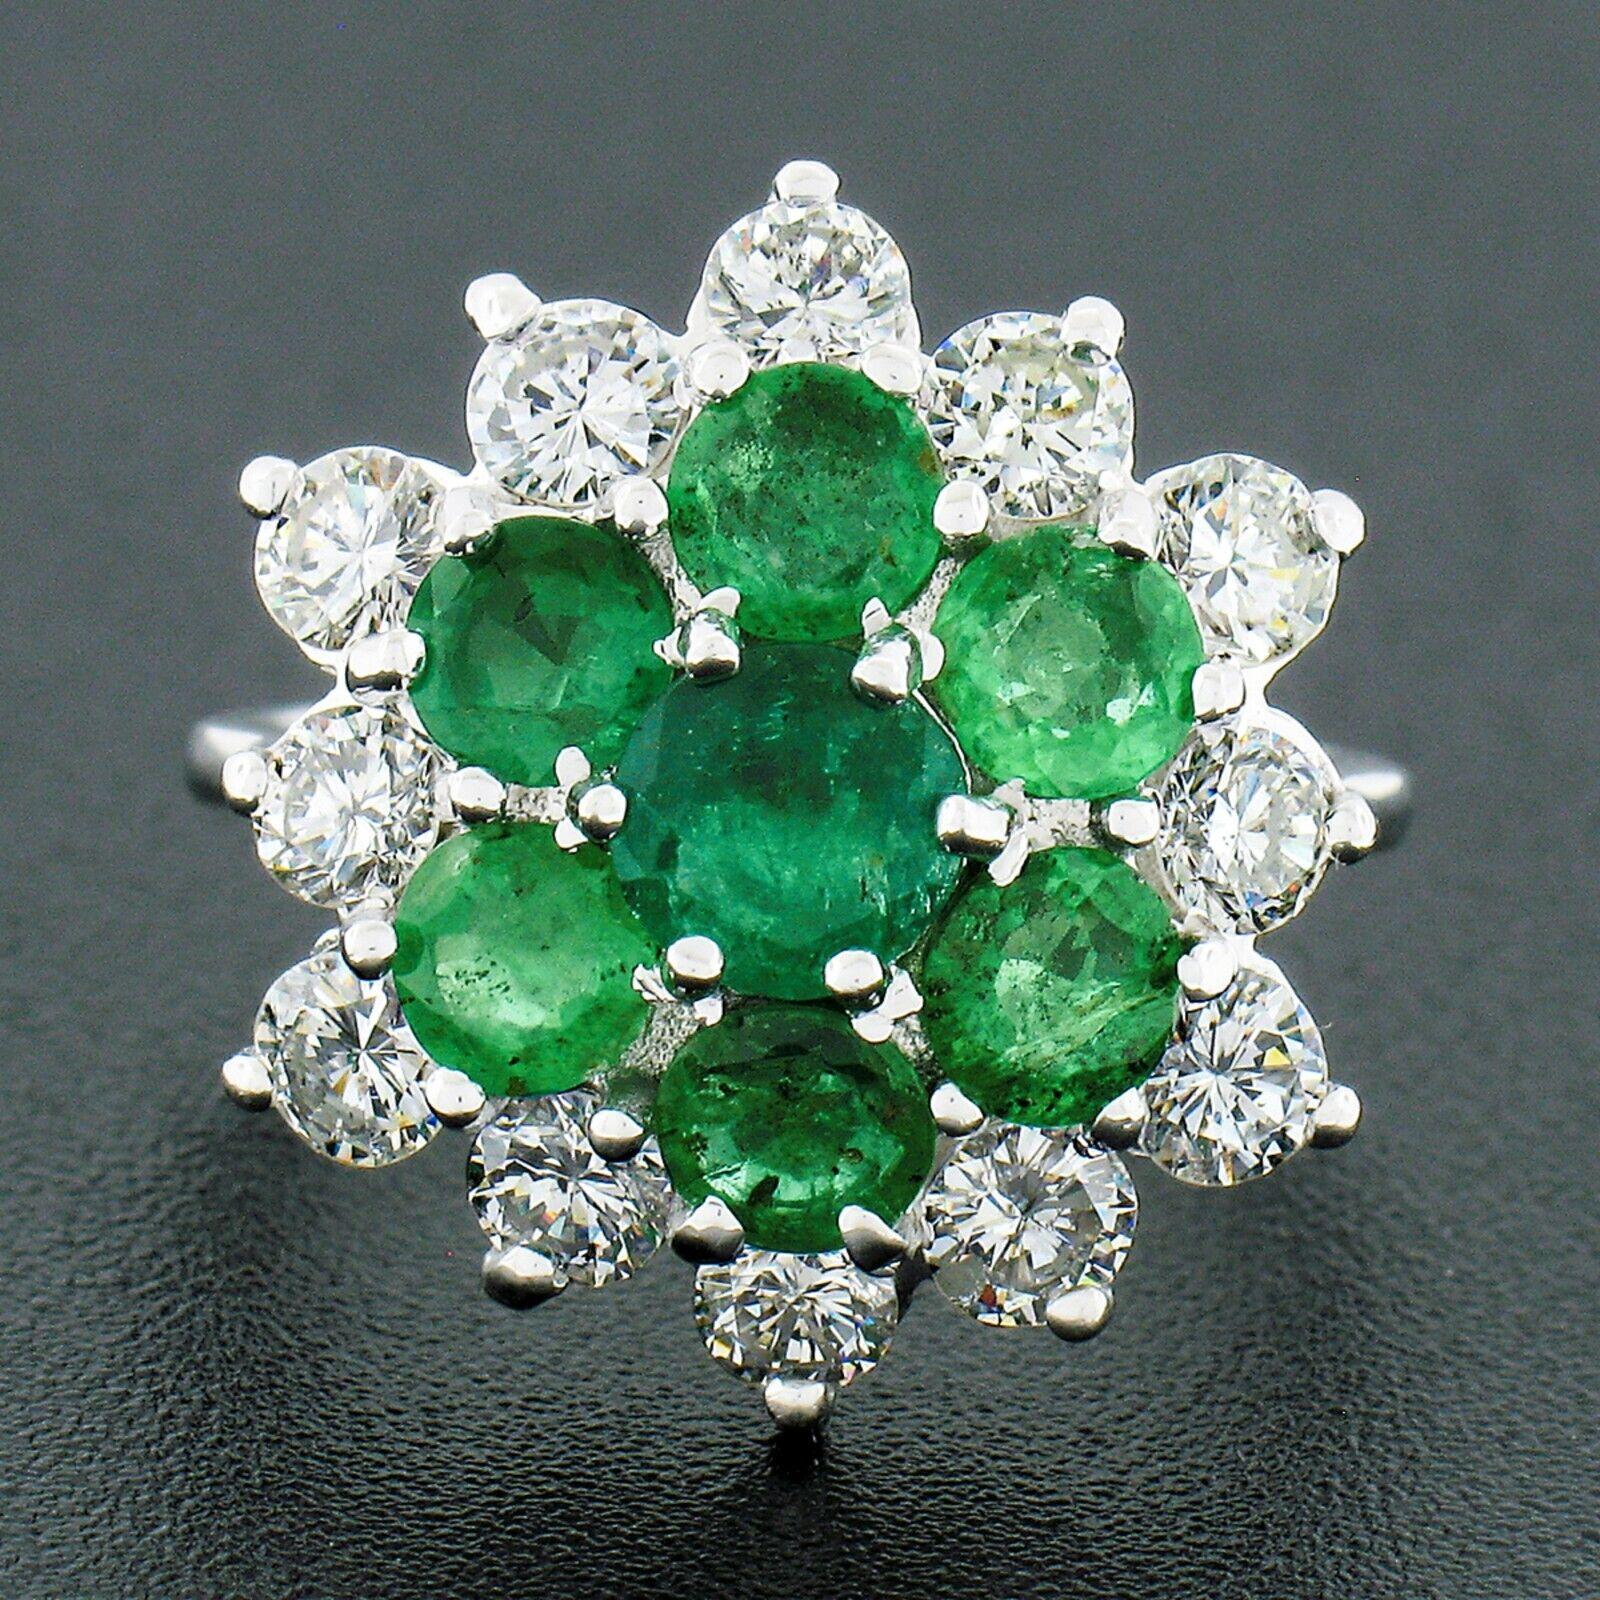 Here we have a large, vintage, diamond and emerald cluster flower ring crafted in solid 18k white gold and featuring a cluster of 7 round emeralds surrounded by a set of 12 round brilliant cut diamonds. The diamonds weigh an approximate total of